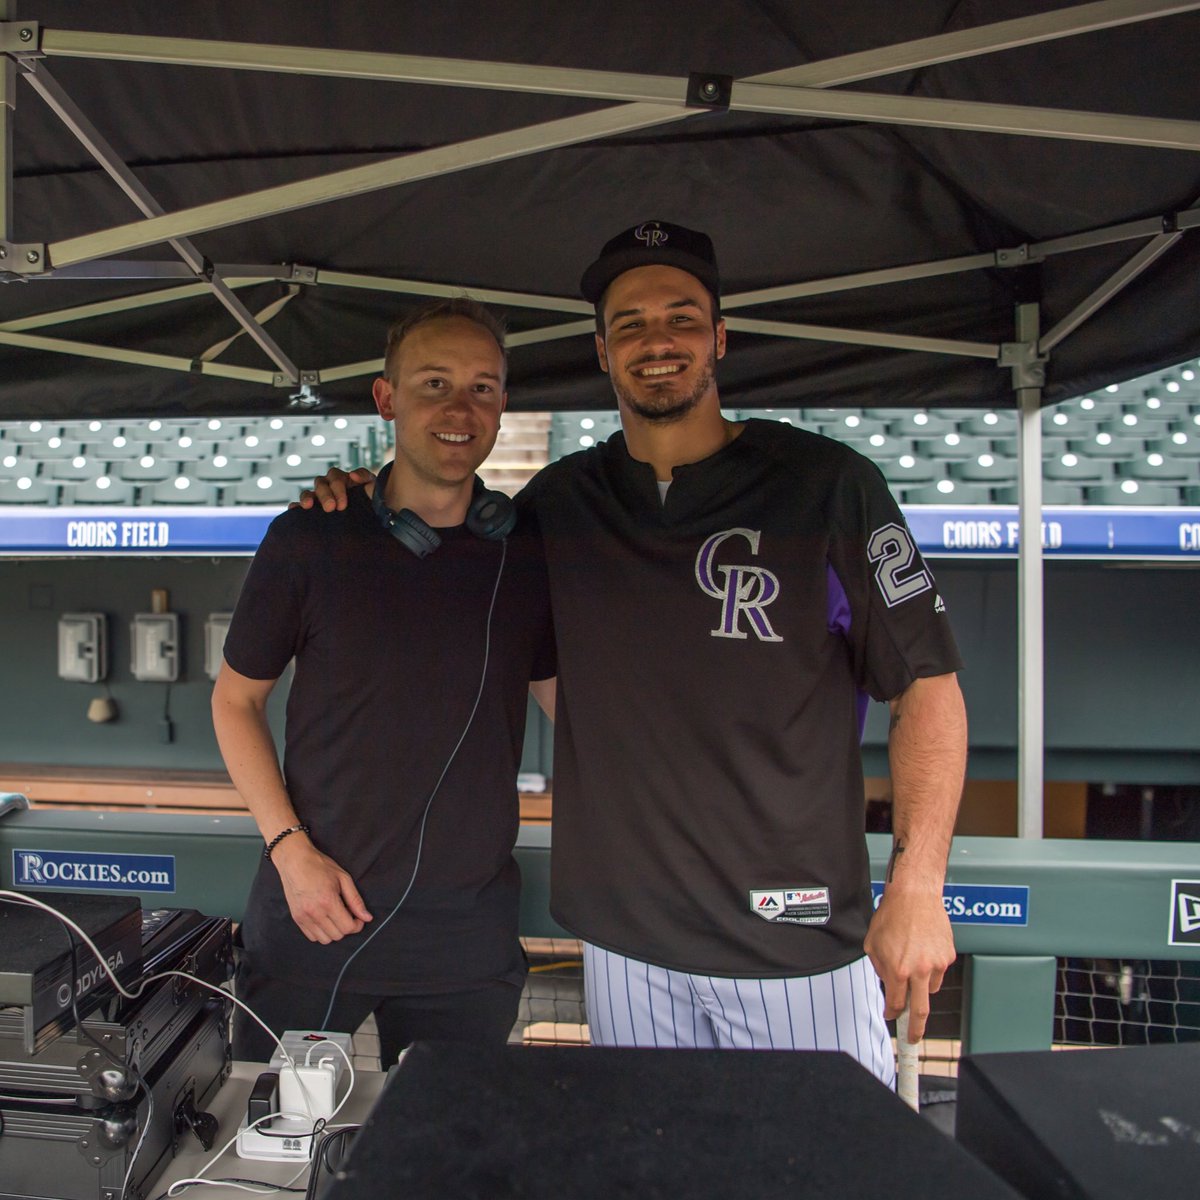 Nolan brought in a DJ to spin a little bit and kick things up a notch at BP today. 💪 https://t.co/RuKqbOq7Ii